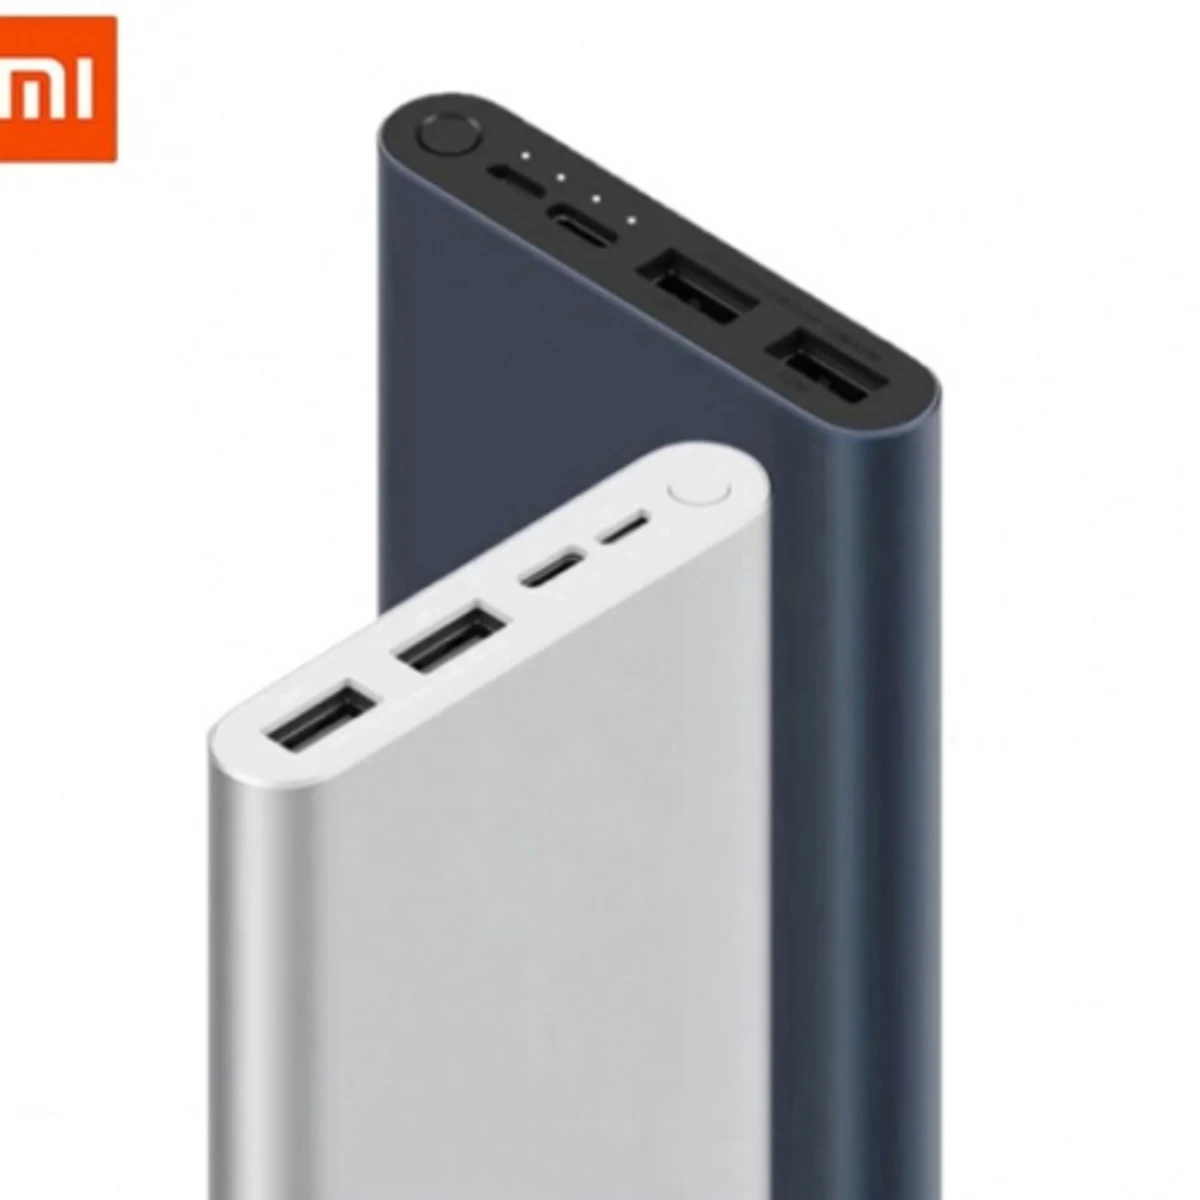 Original Xiaomi Mi Power Bank 3 10000mAh Upgrade with 3 USB Output Supports Two Way Quick Charge 18W Max Powerbank For Smart Phone